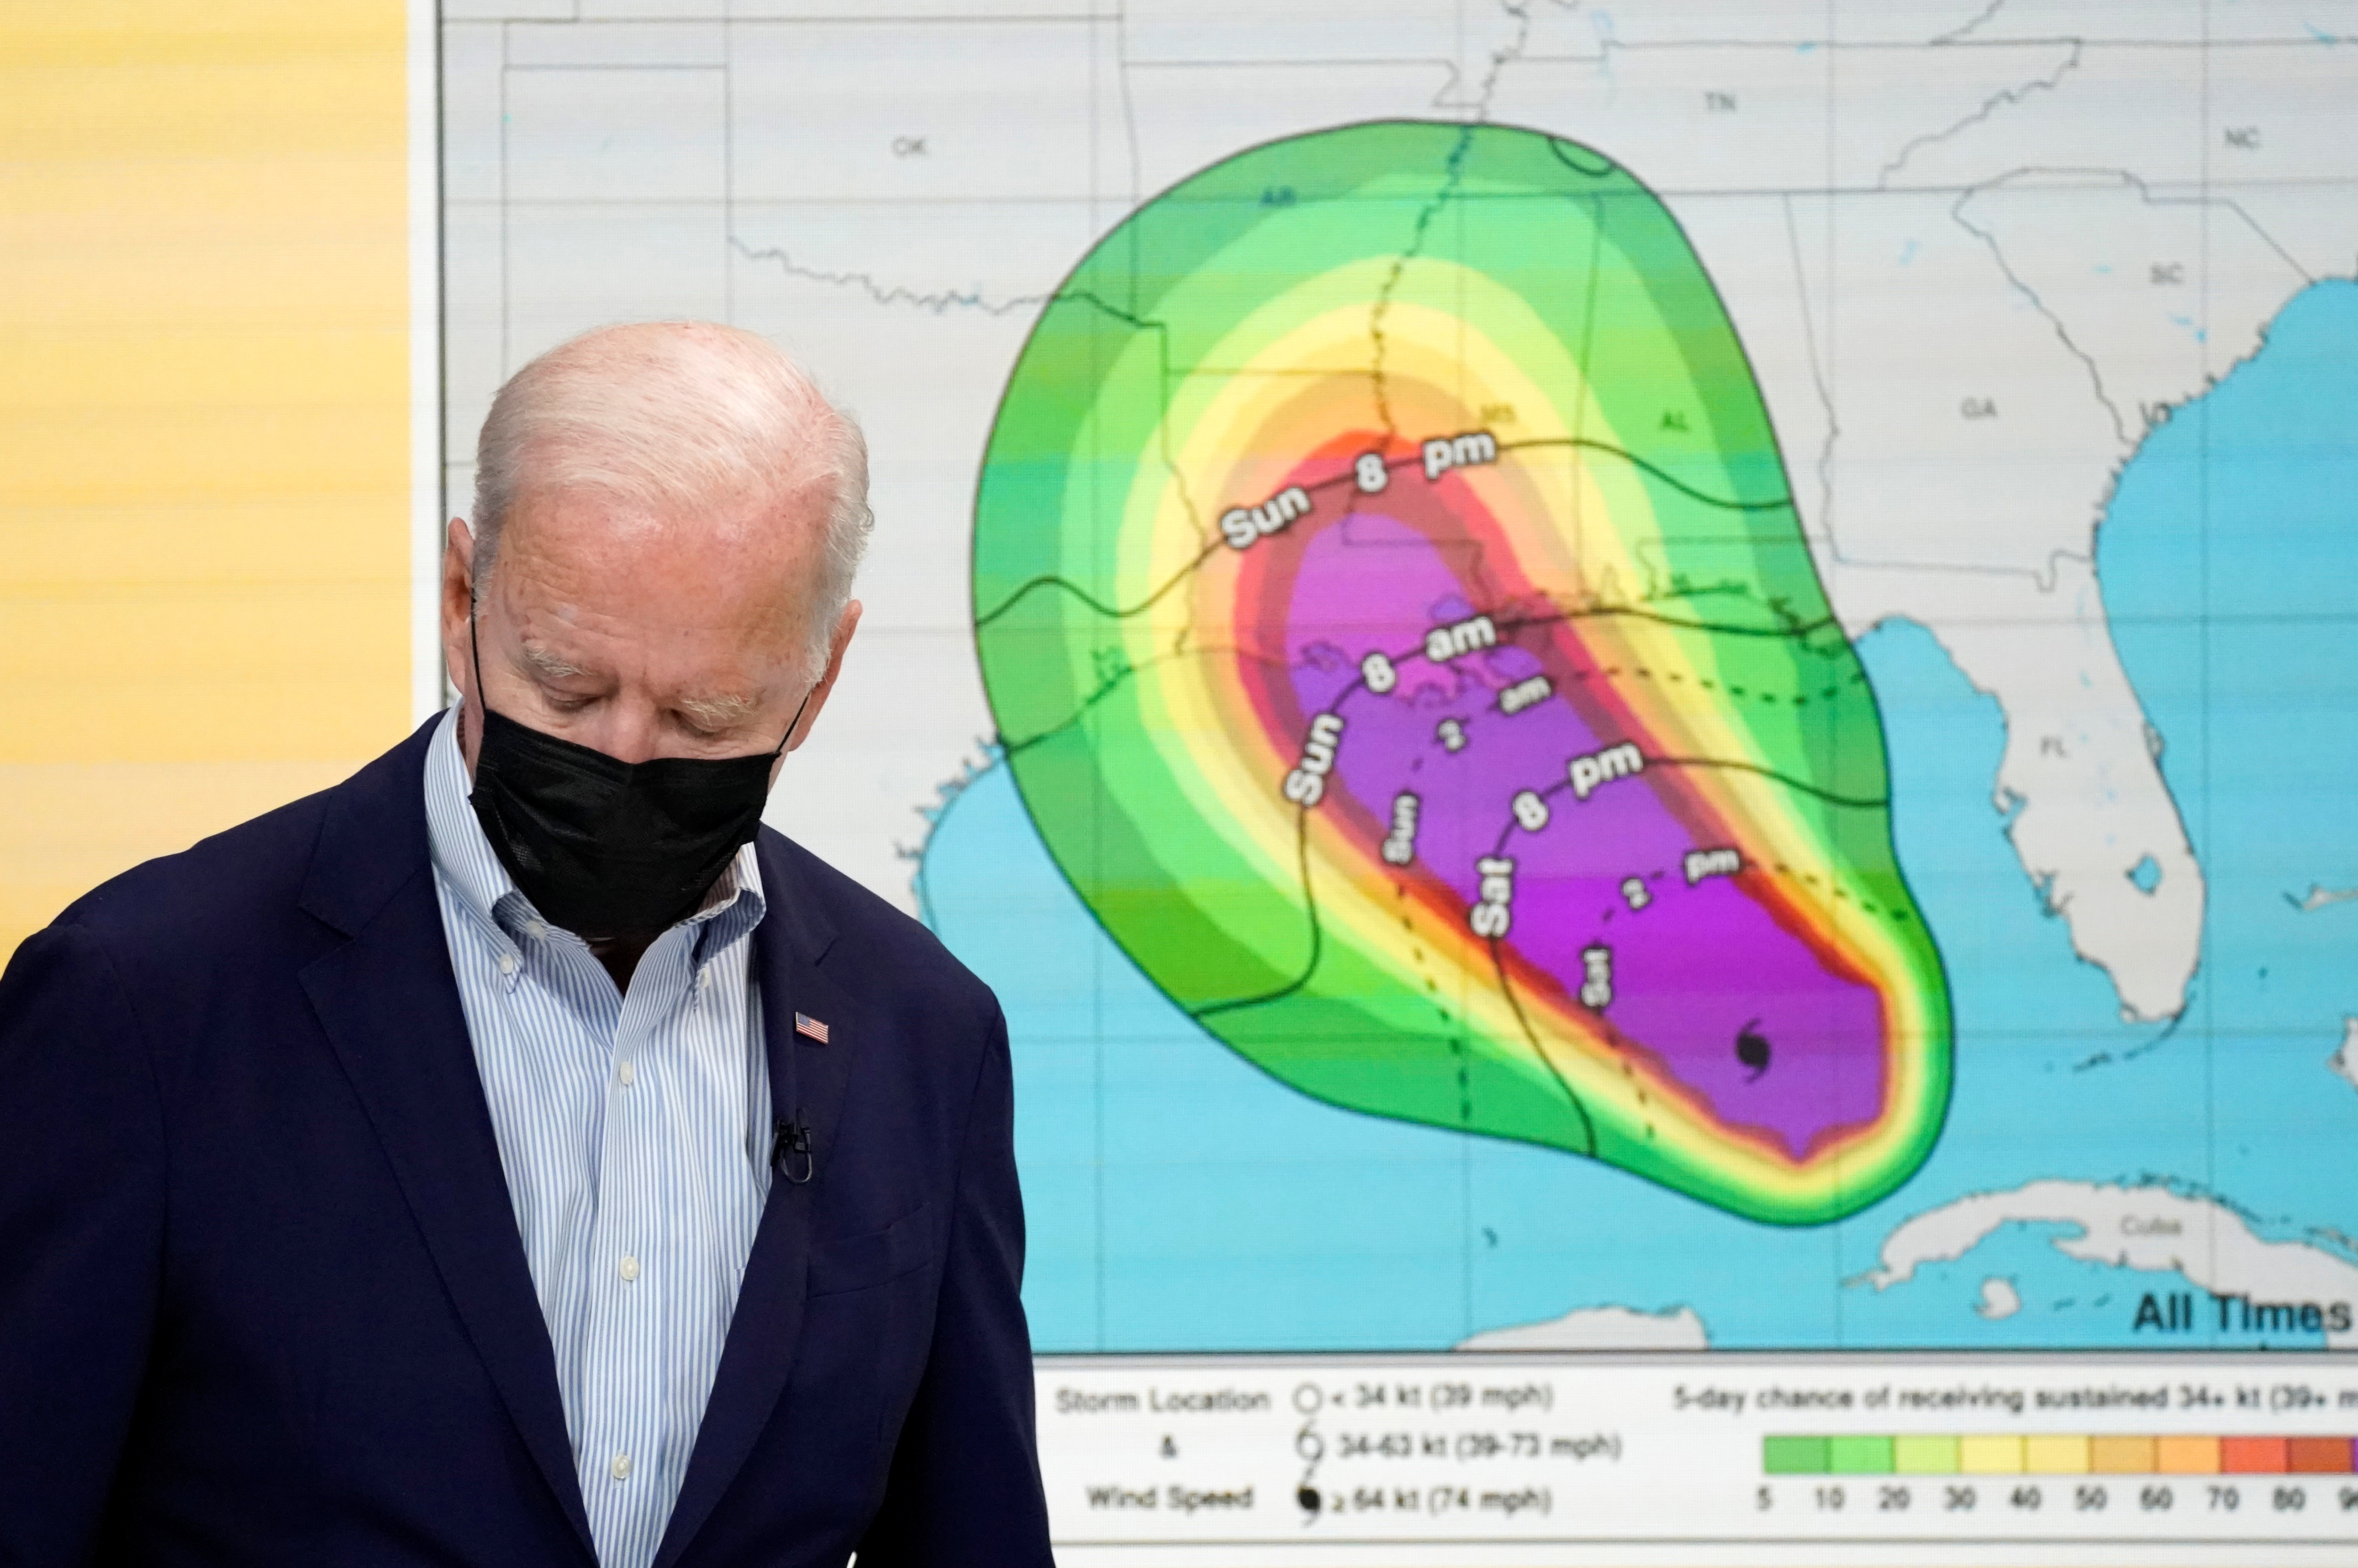 U.S. President Joe Biden arrives for a virtual briefing with FEMA Administrator Deanne Criswell on preparations for Hurricane Ida at the White House in Washington